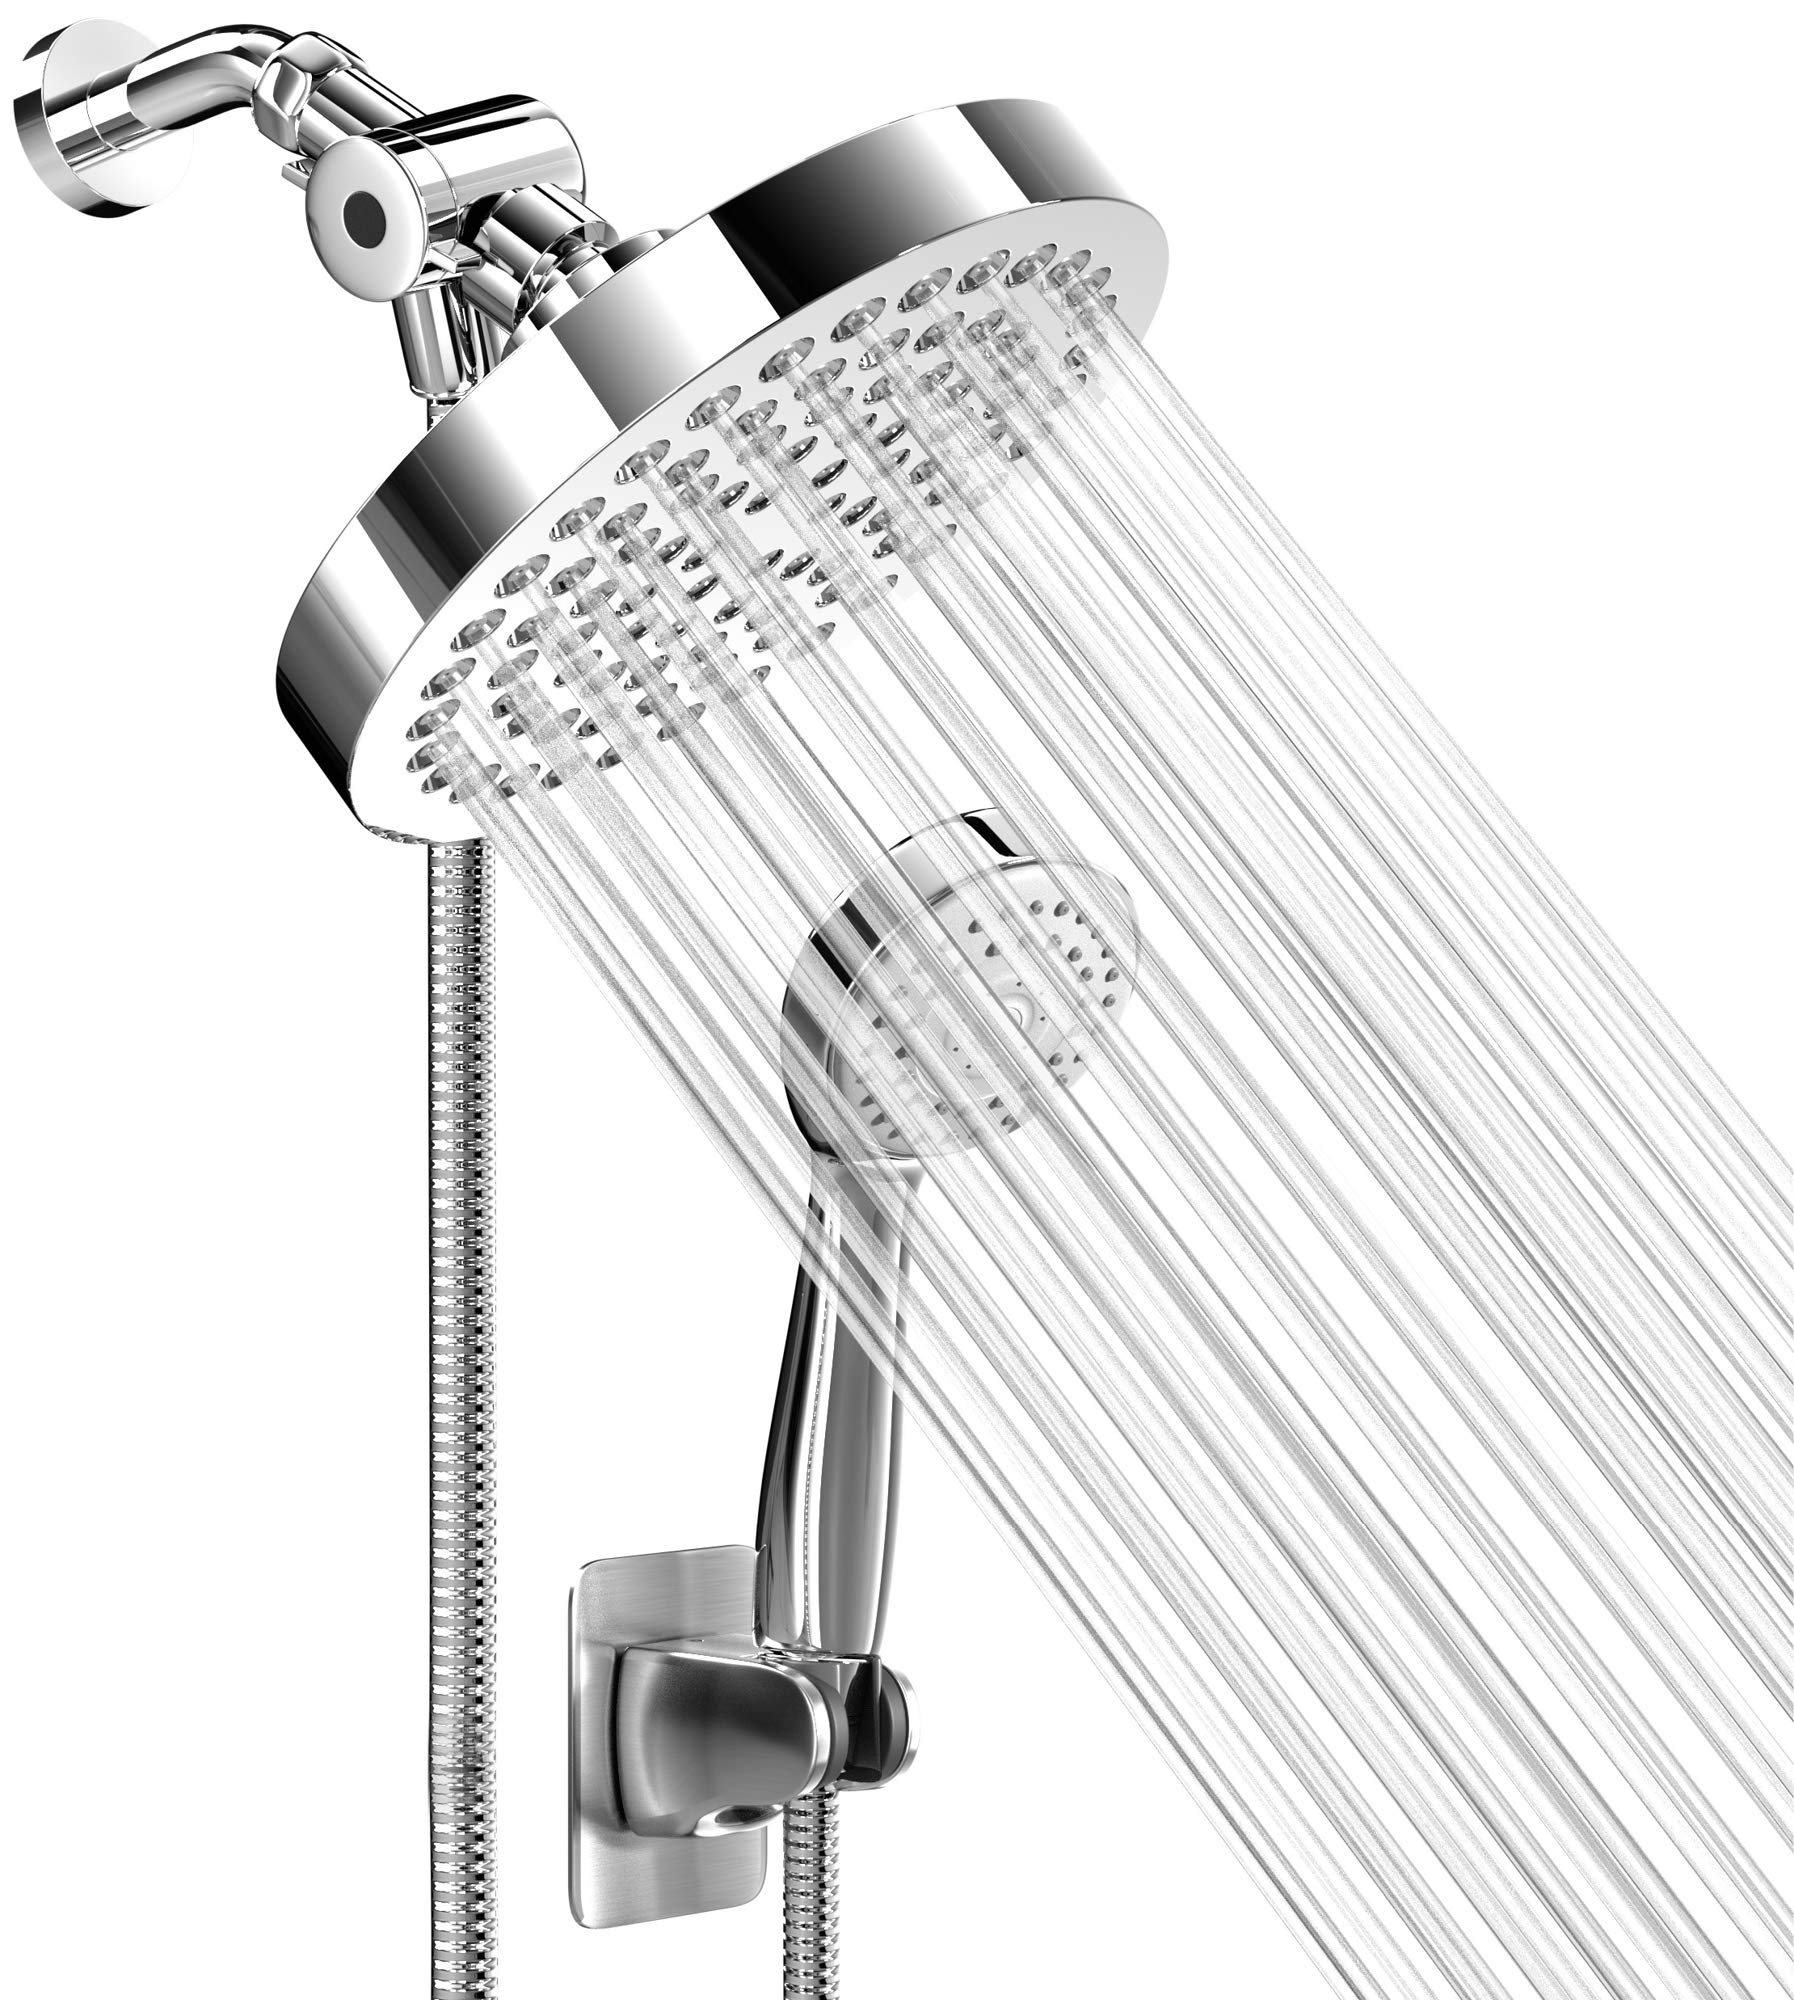 Shower Head With Handheld Combo, 6 Inch High Pressure Rainfall Showerhead With Hand Held 70 Inch Hose for Bath - Adjustable Swivel Shower Head Spray Anti-leak Nozzles - Universal Fit  - Acceptable